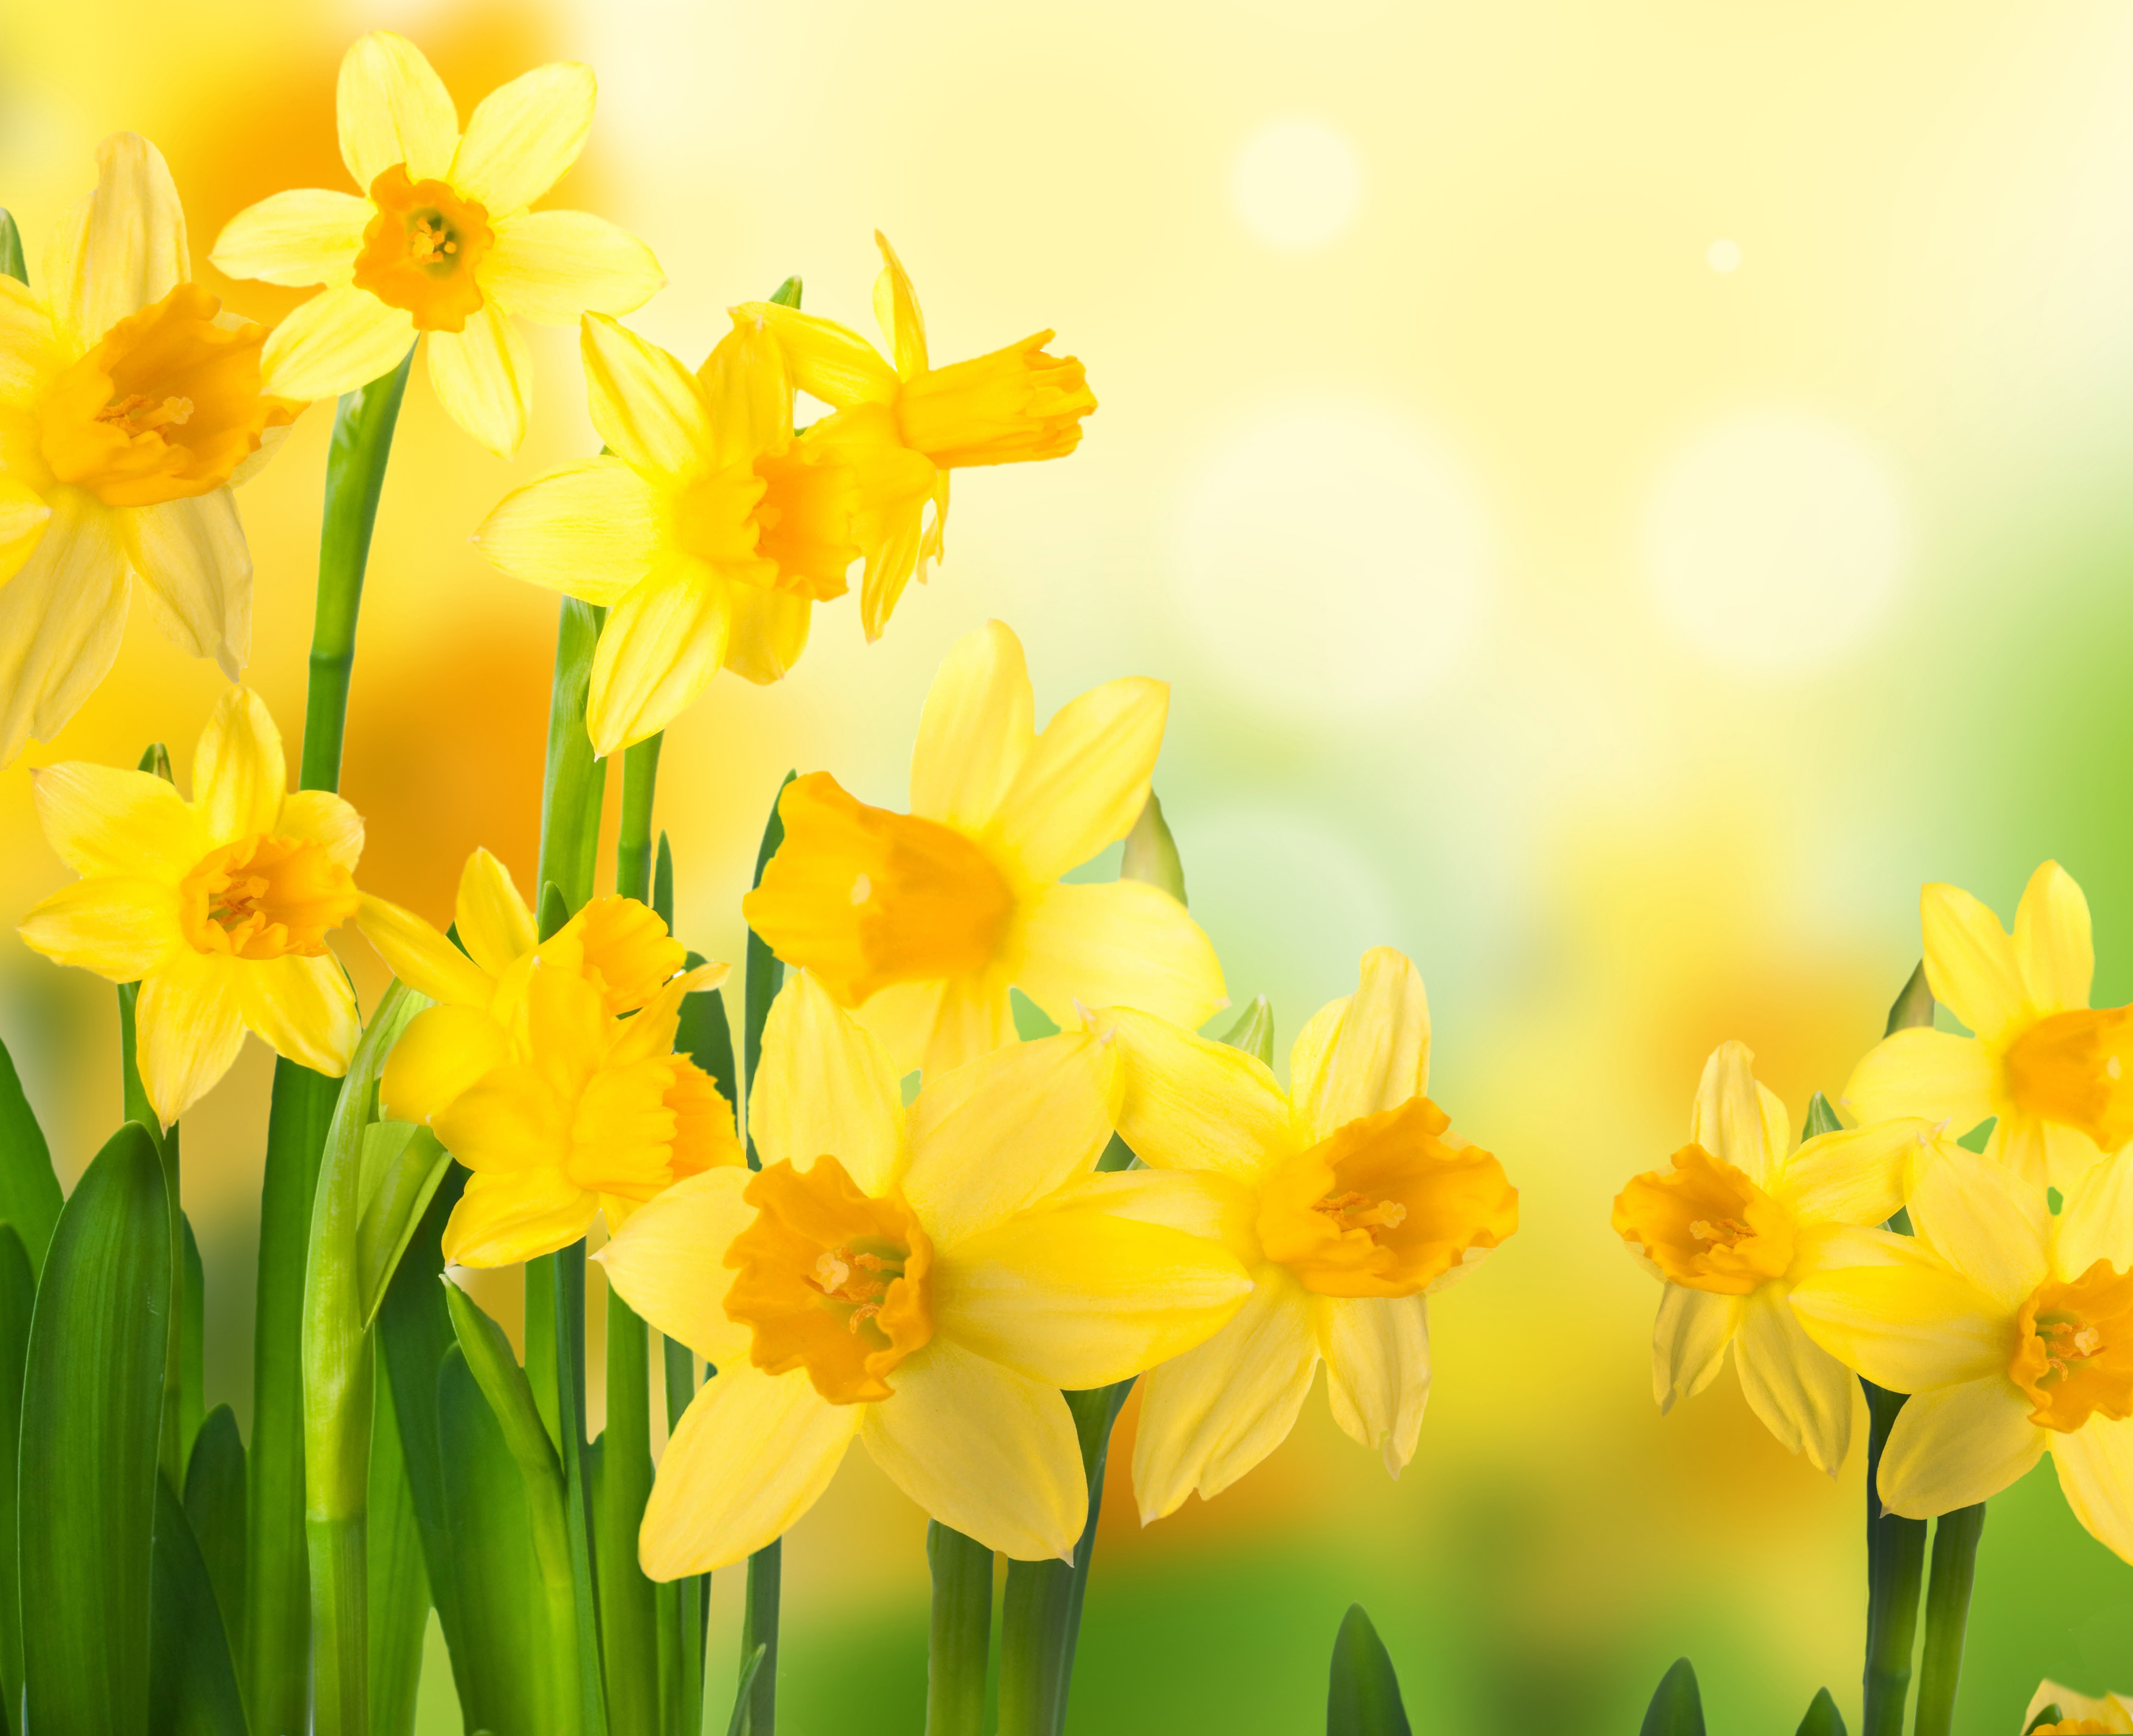 Wallpaper Nature Flowers Daffodils Spring